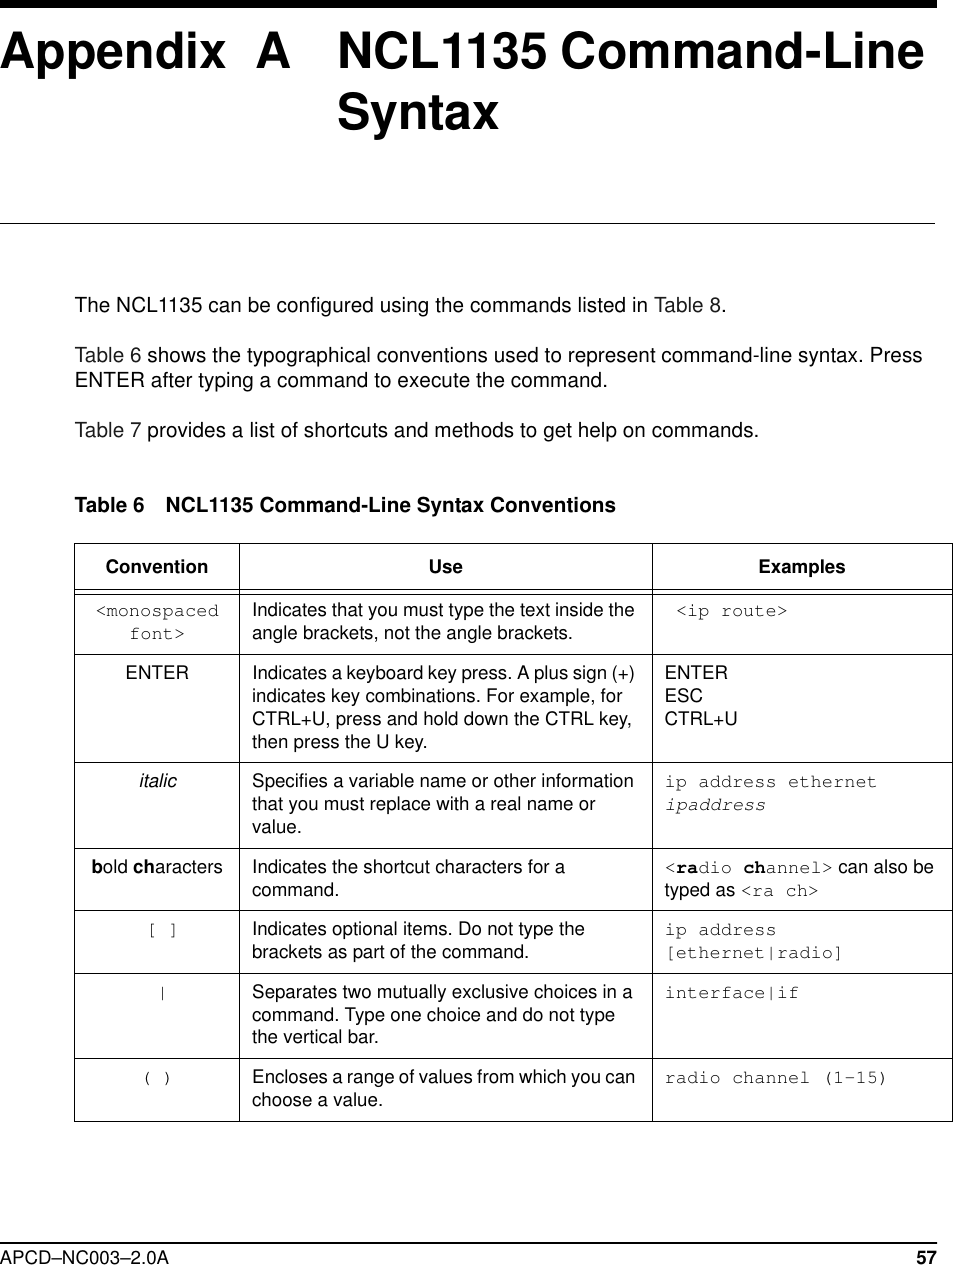 APCD–NC003–2.0A 57Appendix  A    NCL1135 Command-Line SyntaxThe NCL1135 can be configured using the commands listed in Table 8.Table 6 shows the typographical conventions used to represent command-line syntax. Press ENTER after typing a command to execute the command.Table 7 provides a list of shortcuts and methods to get help on commands.Table 6 NCL1135 Command-Line Syntax ConventionsConvention Use Examples&lt;monospaced font&gt;Indicates that you must type the text inside the angle brackets, not the angle brackets.  &lt;ip route&gt;ENTER Indicates a keyboard key press. A plus sign (+) indicates key combinations. For example, for CTRL+U, press and hold down the CTRL key, then press the U key.ENTERESCCTRL+Uitalic Specifies a variable name or other information that you must replace with a real name or value.ip address ethernet ipaddressbold characters Indicates the shortcut characters for a command.  &lt;radio channel&gt; can also be typed as &lt;ra ch&gt; [ ] Indicates optional items. Do not type the brackets as part of the command. ip address [ethernet|radio] | Separates two mutually exclusive choices in a command. Type one choice and do not type the vertical bar.interface|if( ) Encloses a range of values from which you can choose a value.  radio channel (1-15)